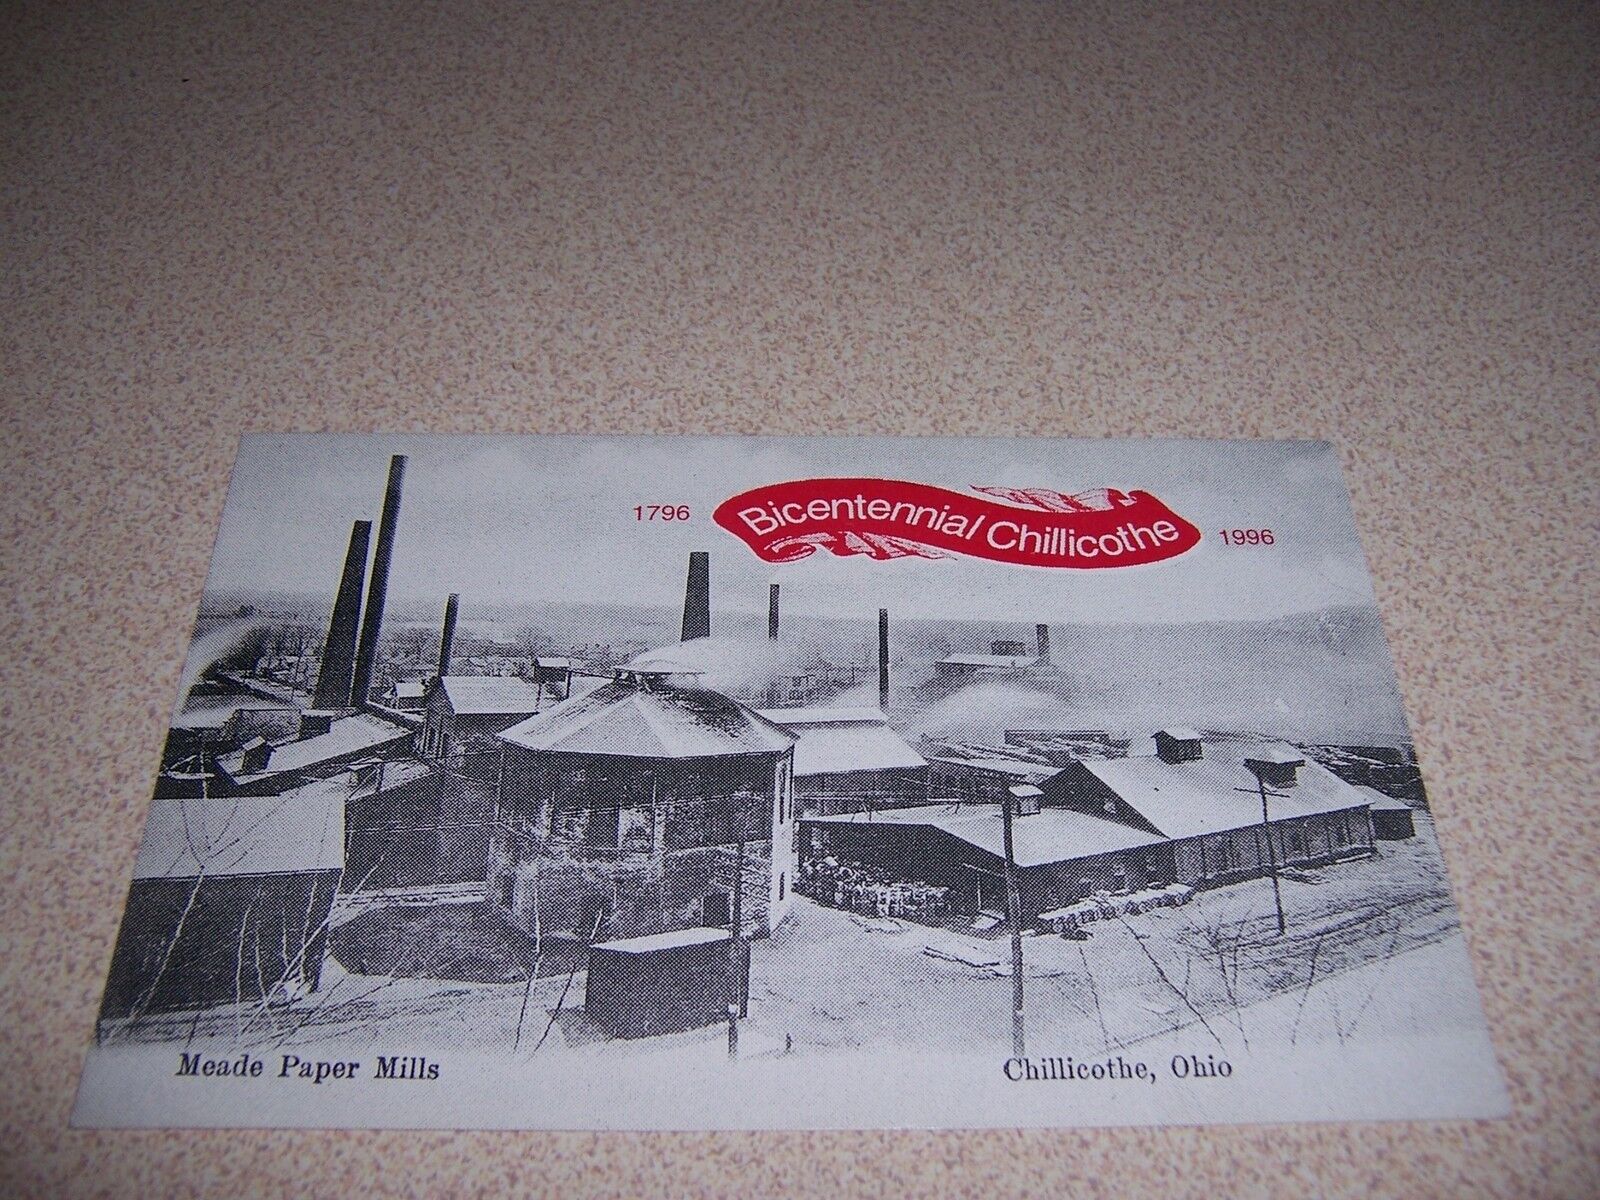 c.1900 VIEW of MEADE PAPER MILLS CHILLICOTHE OHIO BICENTENNIAL POSTCARD